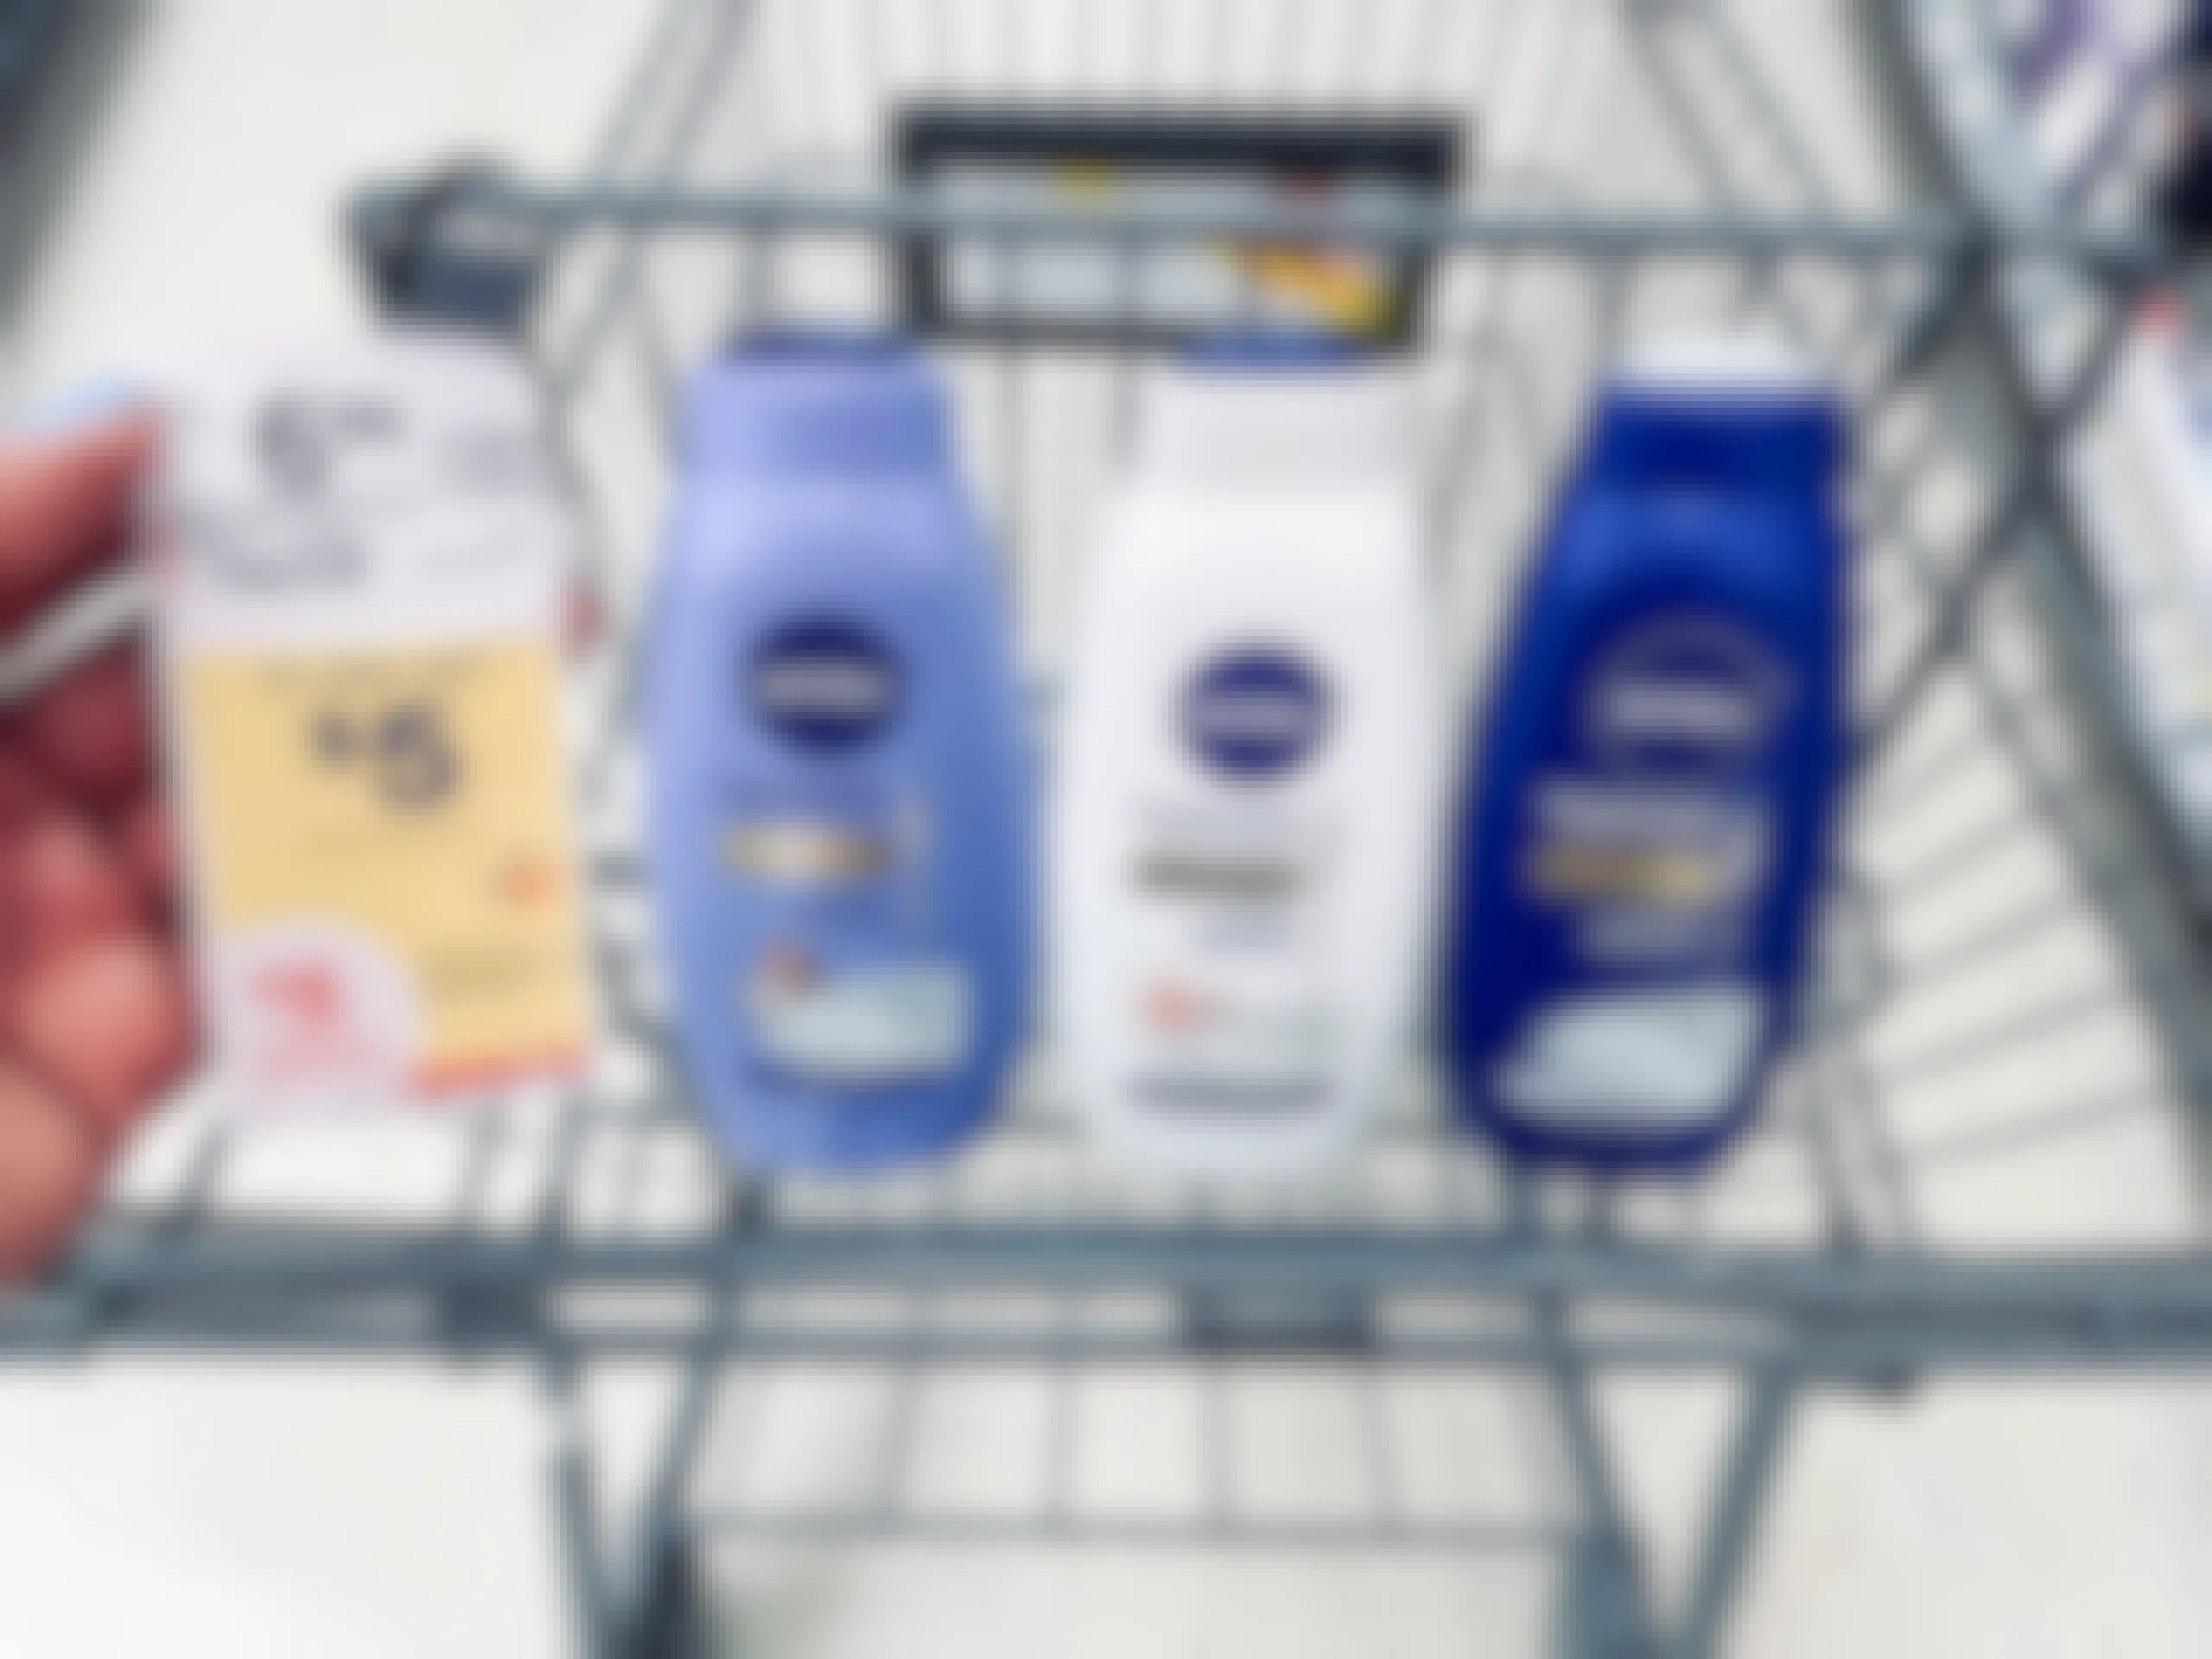 shopping cart with three bottles of Nivea body washes and hand holding sales tag in the air next to the bottles